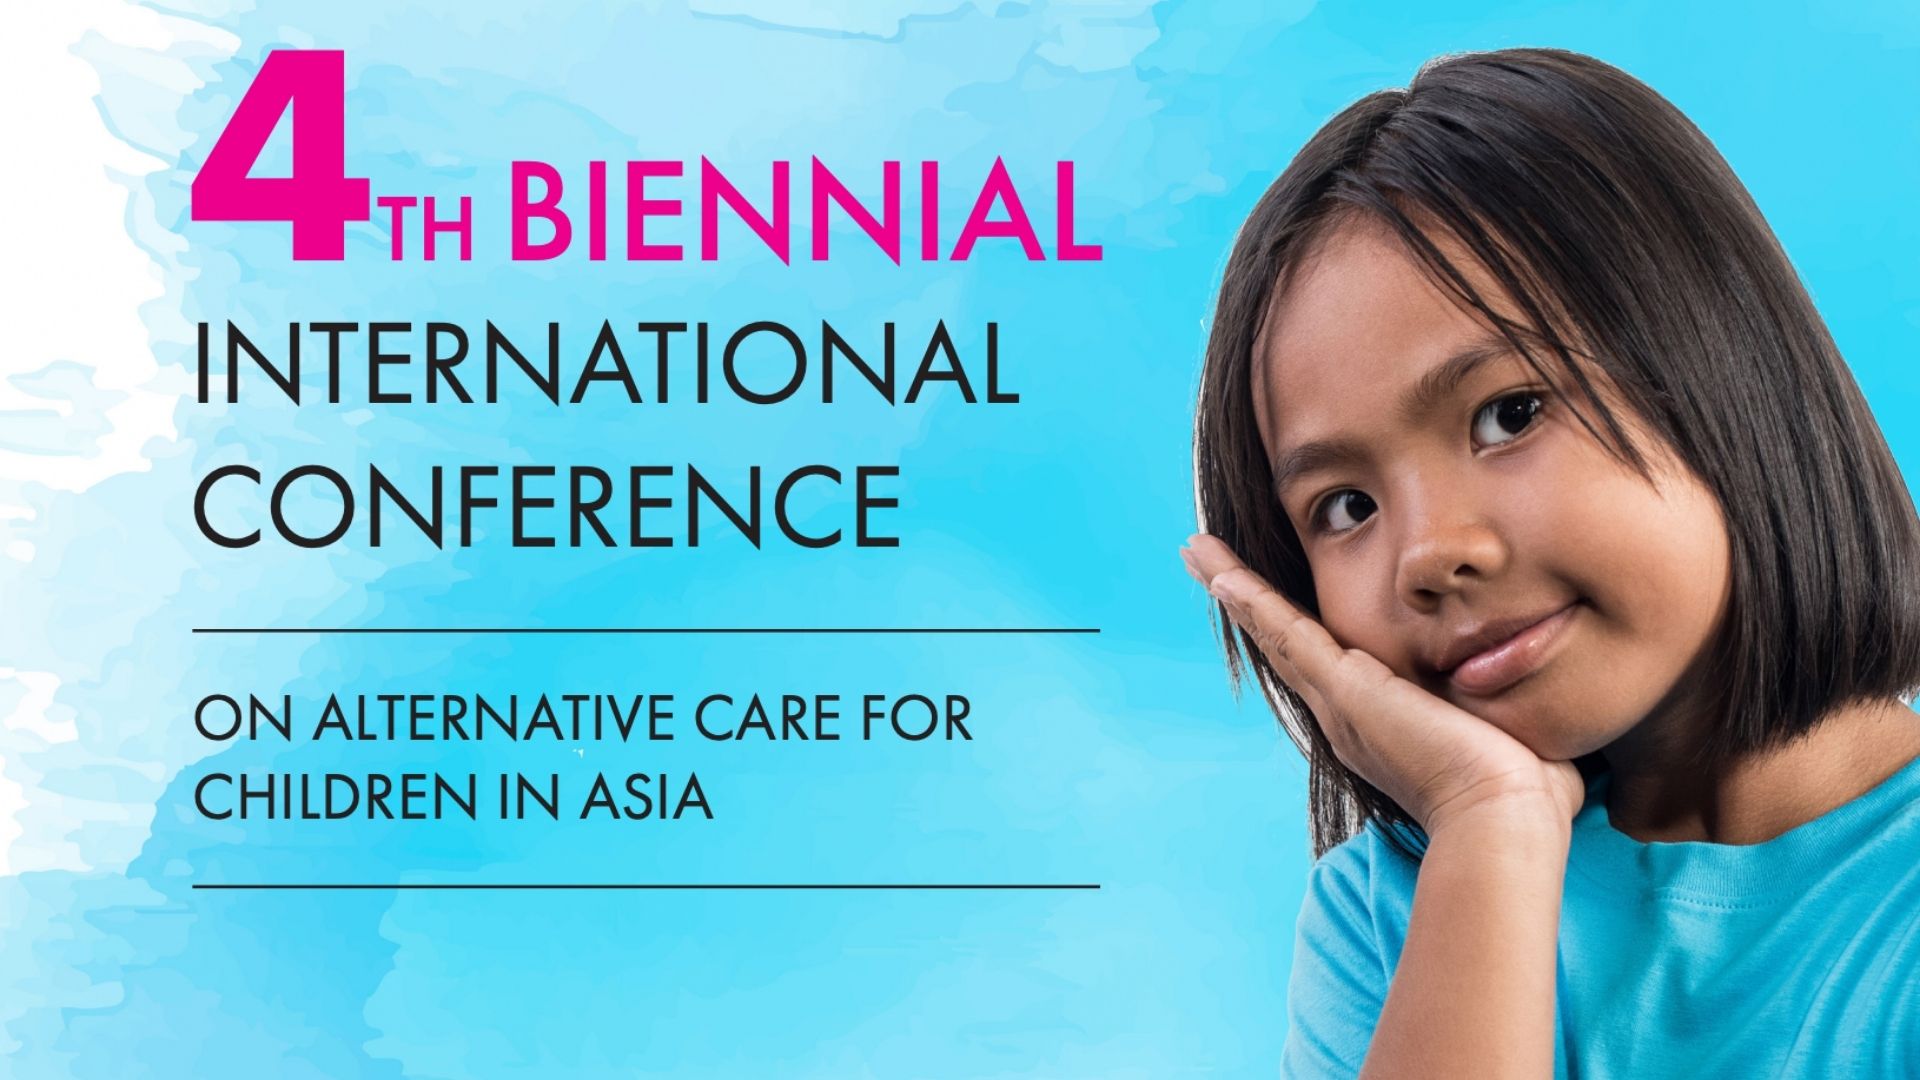 The cover of the 4th BICON (Biennial International conference on alternative care for children in Asia) report, with an image of a young girl